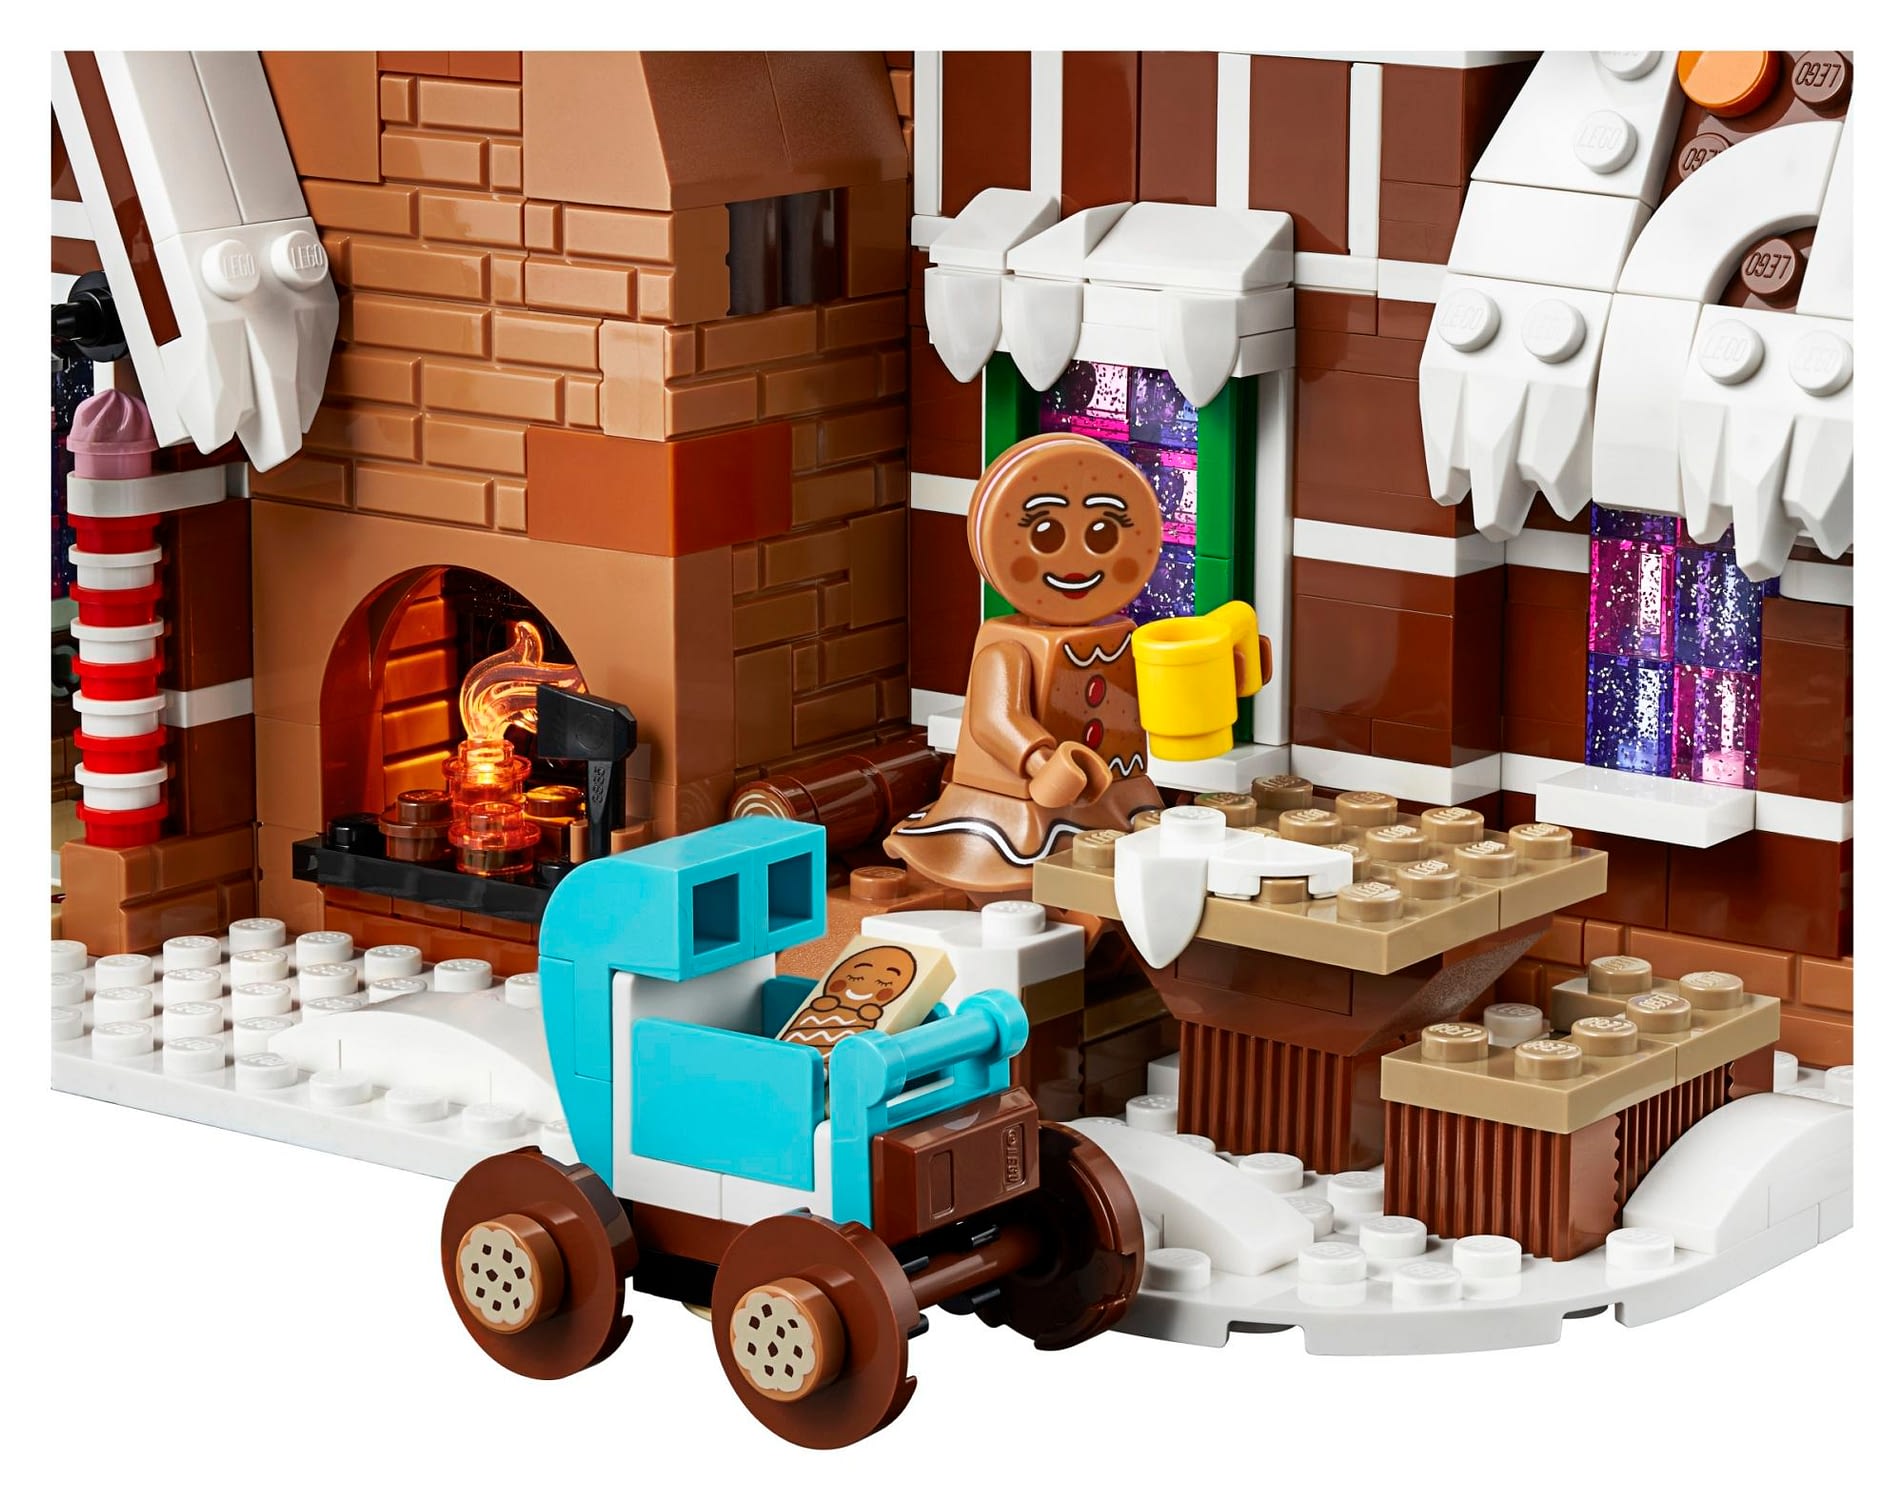 Gingerbread Family Gets Nice and Cozy with New LEGO Set